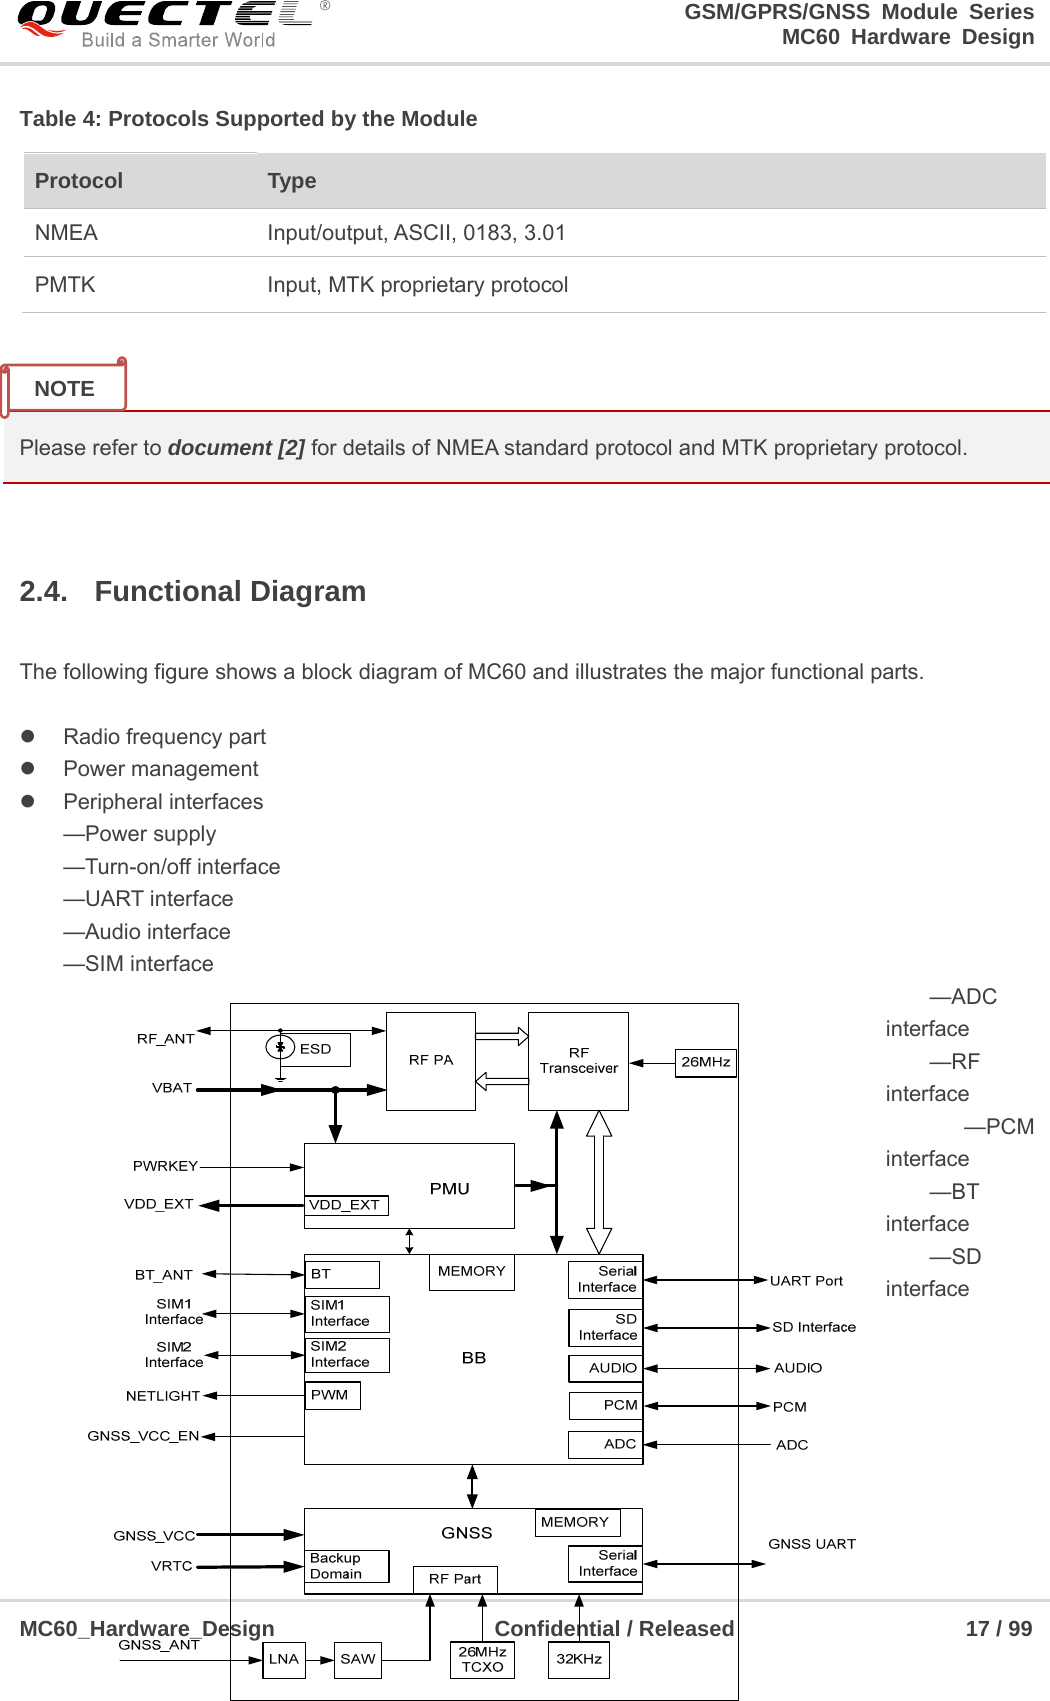                                                                     GSM/GPRS/GNSS Module Series                                                                 MC60 Hardware Design  MC60_Hardware_Design                    Confidential / Released                     17 / 99     Table 4: Protocols Supported by the Module   Please refer to document [2] for details of NMEA standard protocol and MTK proprietary protocol.  2.4. Functional Diagram   The following figure shows a block diagram of MC60 and illustrates the major functional parts.      Radio frequency part  Power management  Peripheral interfaces —Power supply —Turn-on/off interface —UART interface —Audio interface —SIM interface  —ADC interface  —RF interface —PCM interface —BT interface —SD interface     Protocol  Type NMEA  Input/output, ASCII, 0183, 3.01 PMTK  Input, MTK proprietary protocol NOTE 